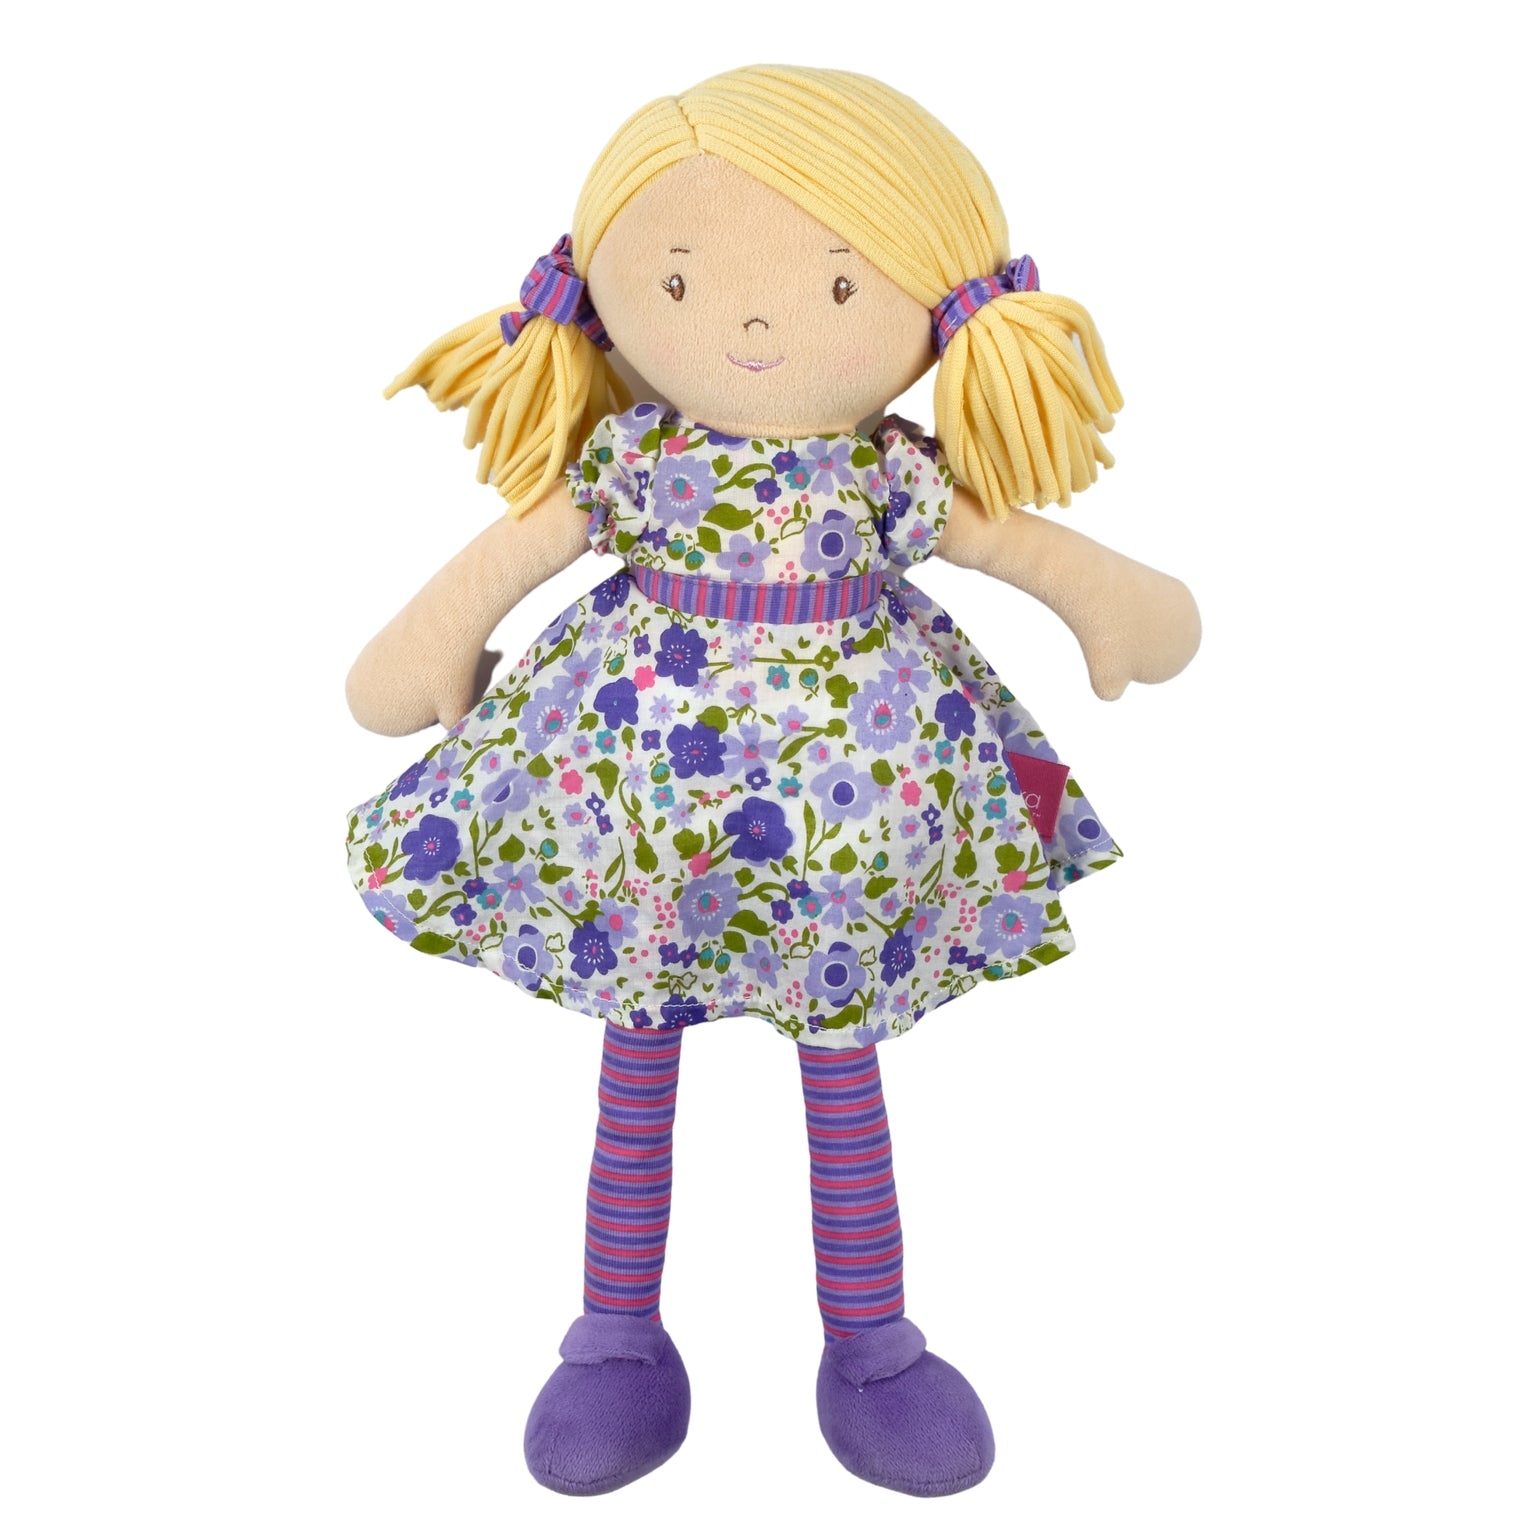 Peggy Blonde Hair with Lilac and Pink Dress - 0